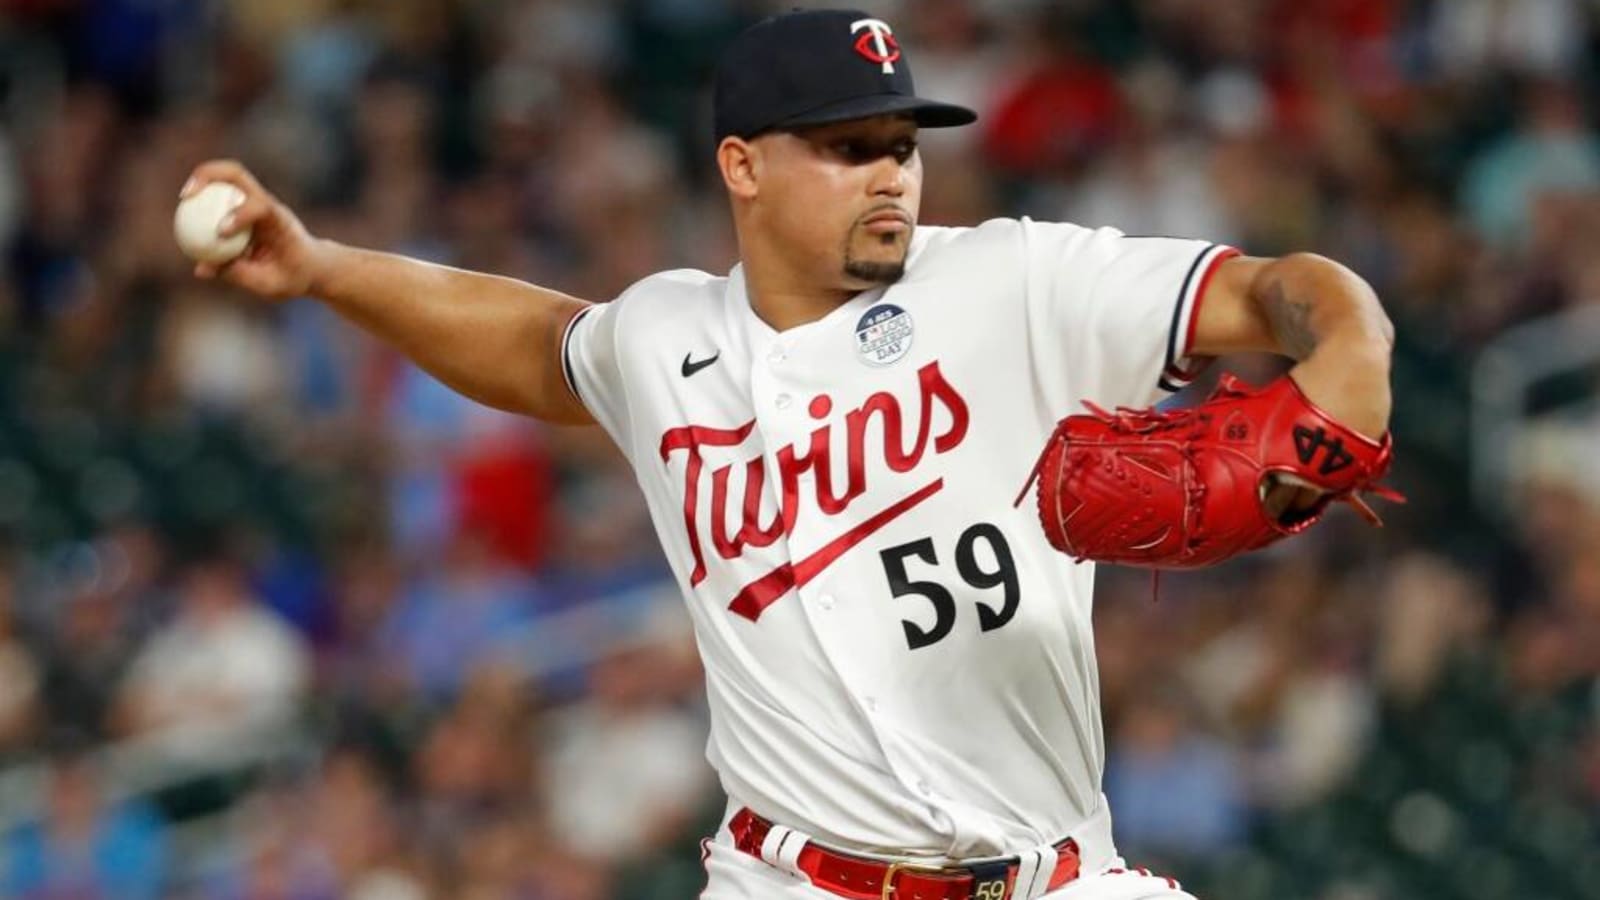 Watch Minnesota Twins vs Cleveland Guardians online free in the US today MLB live stream, TV channel and start time Yardbarker